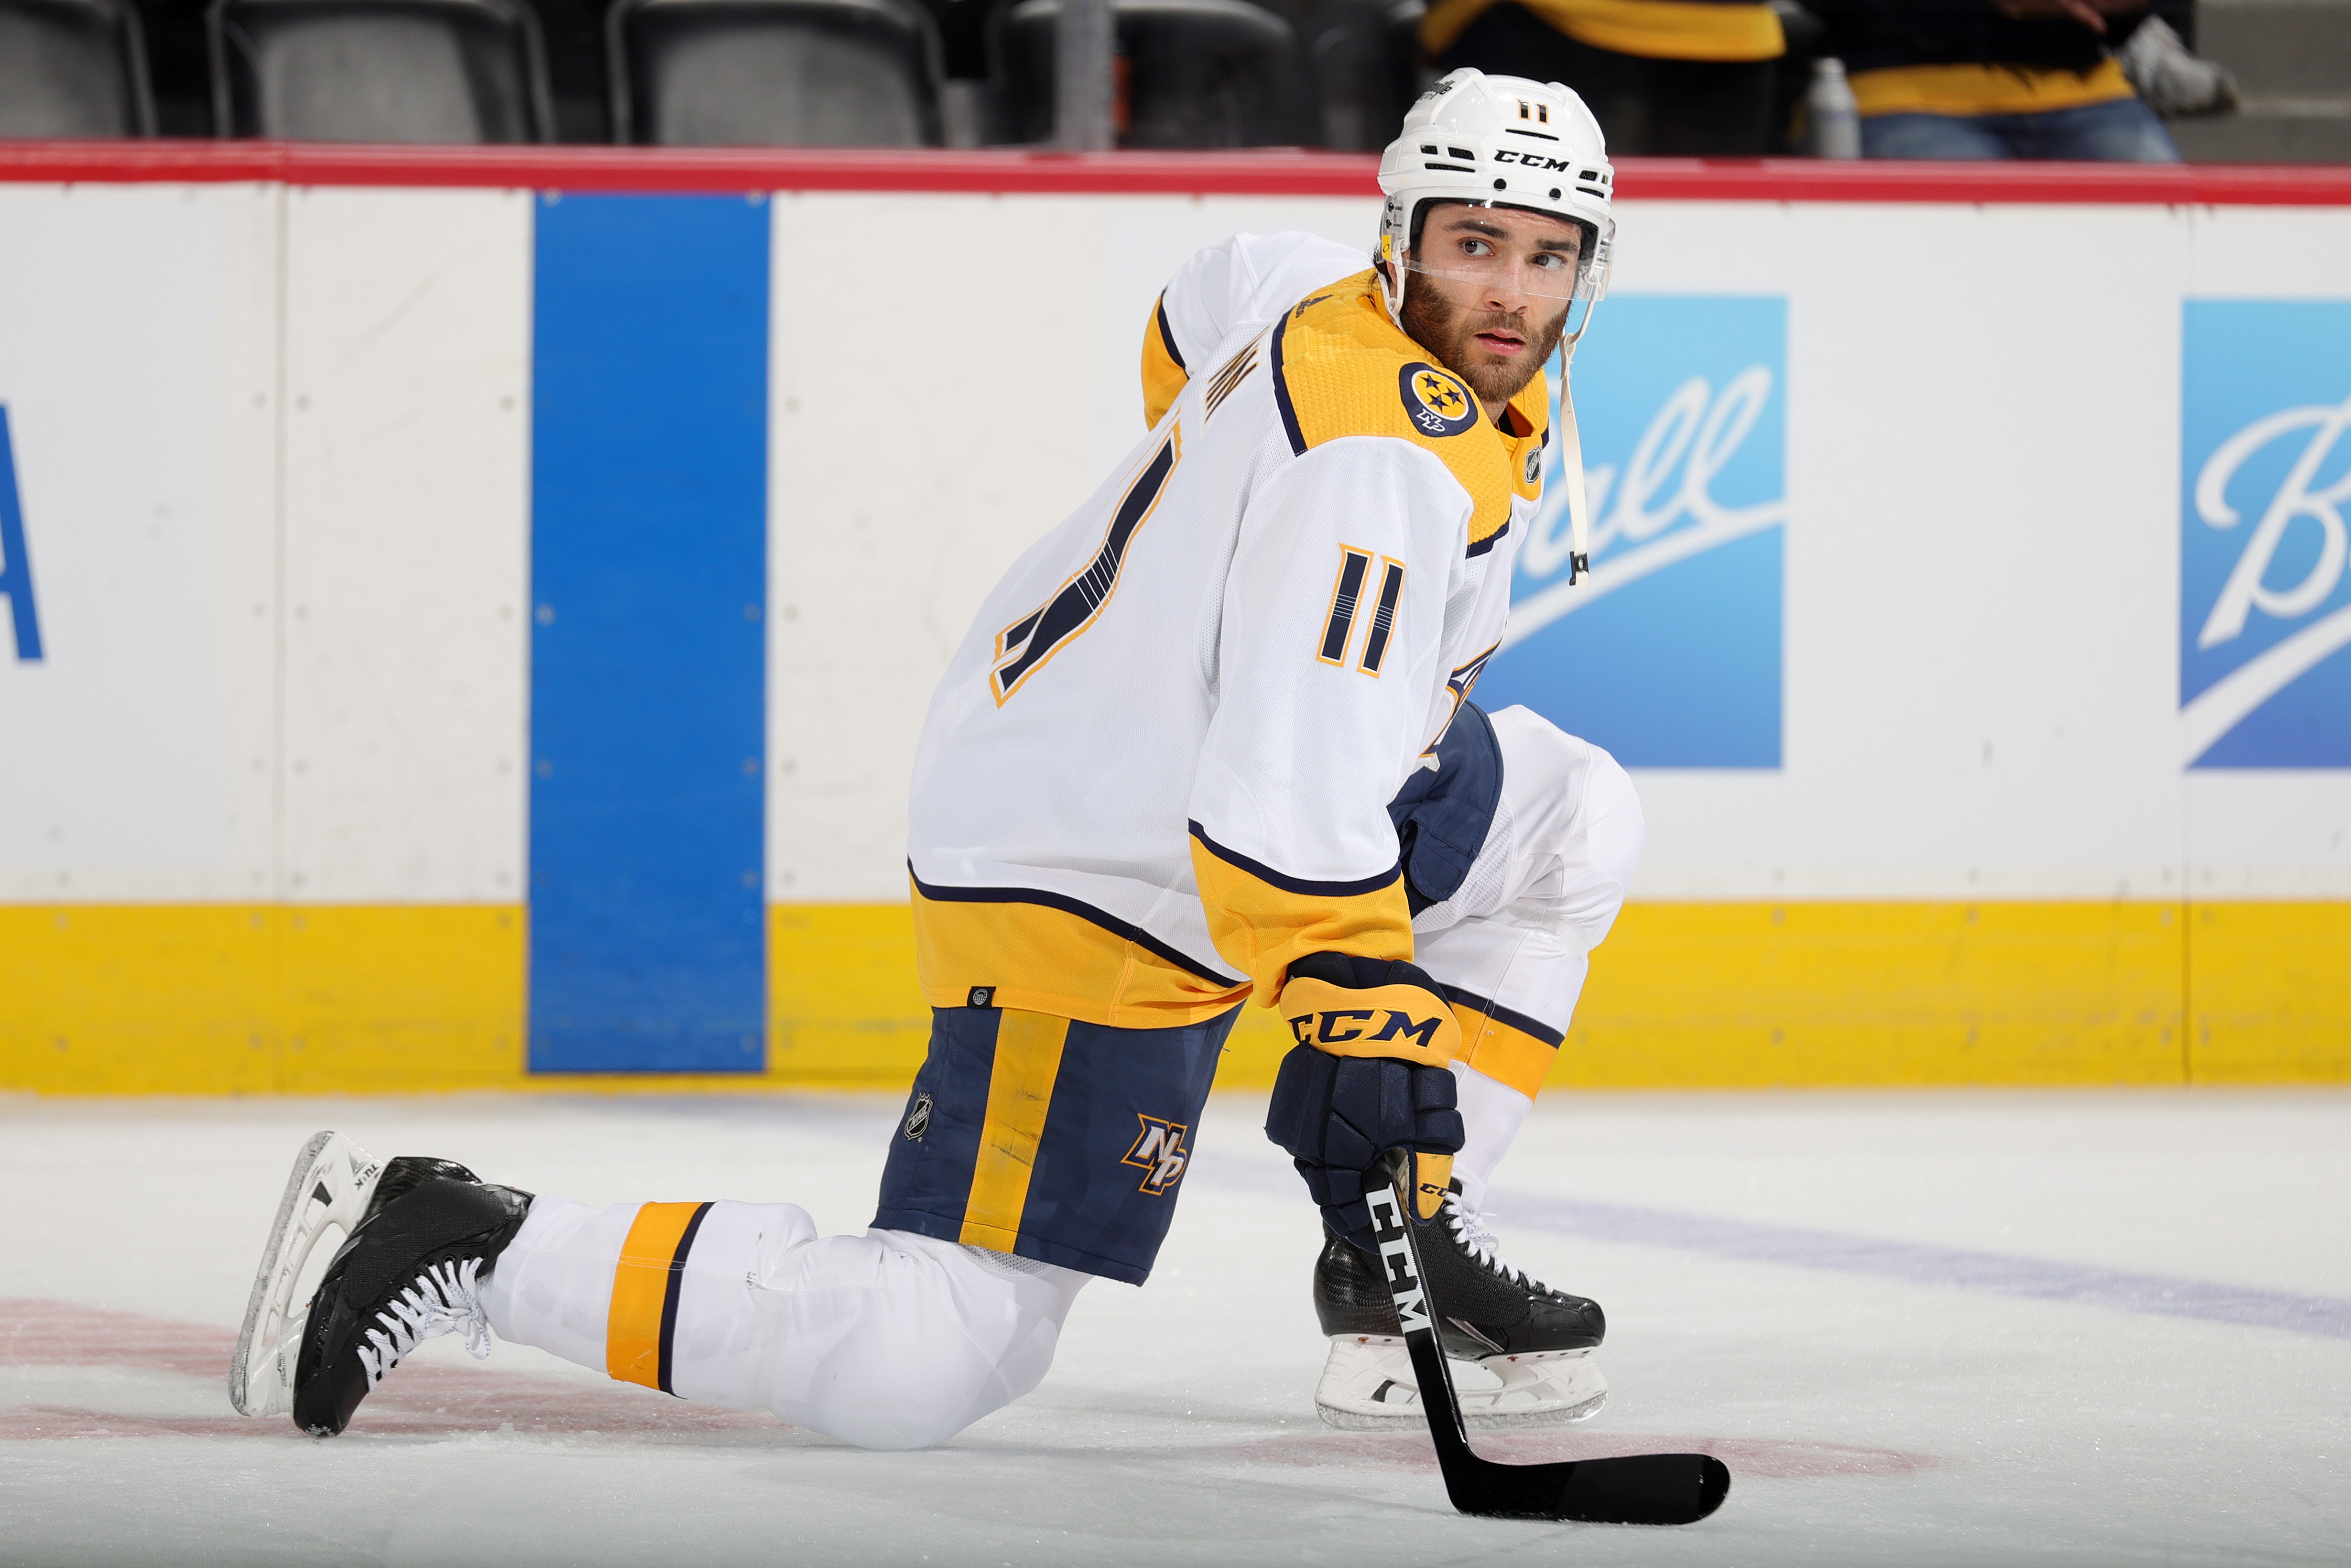 Luke Kunin #11 of the Nashville Predators warms up prior to the game against the Colorado Avalanche at Ball Arena on April 28, 2022 in Denver, Colorado.